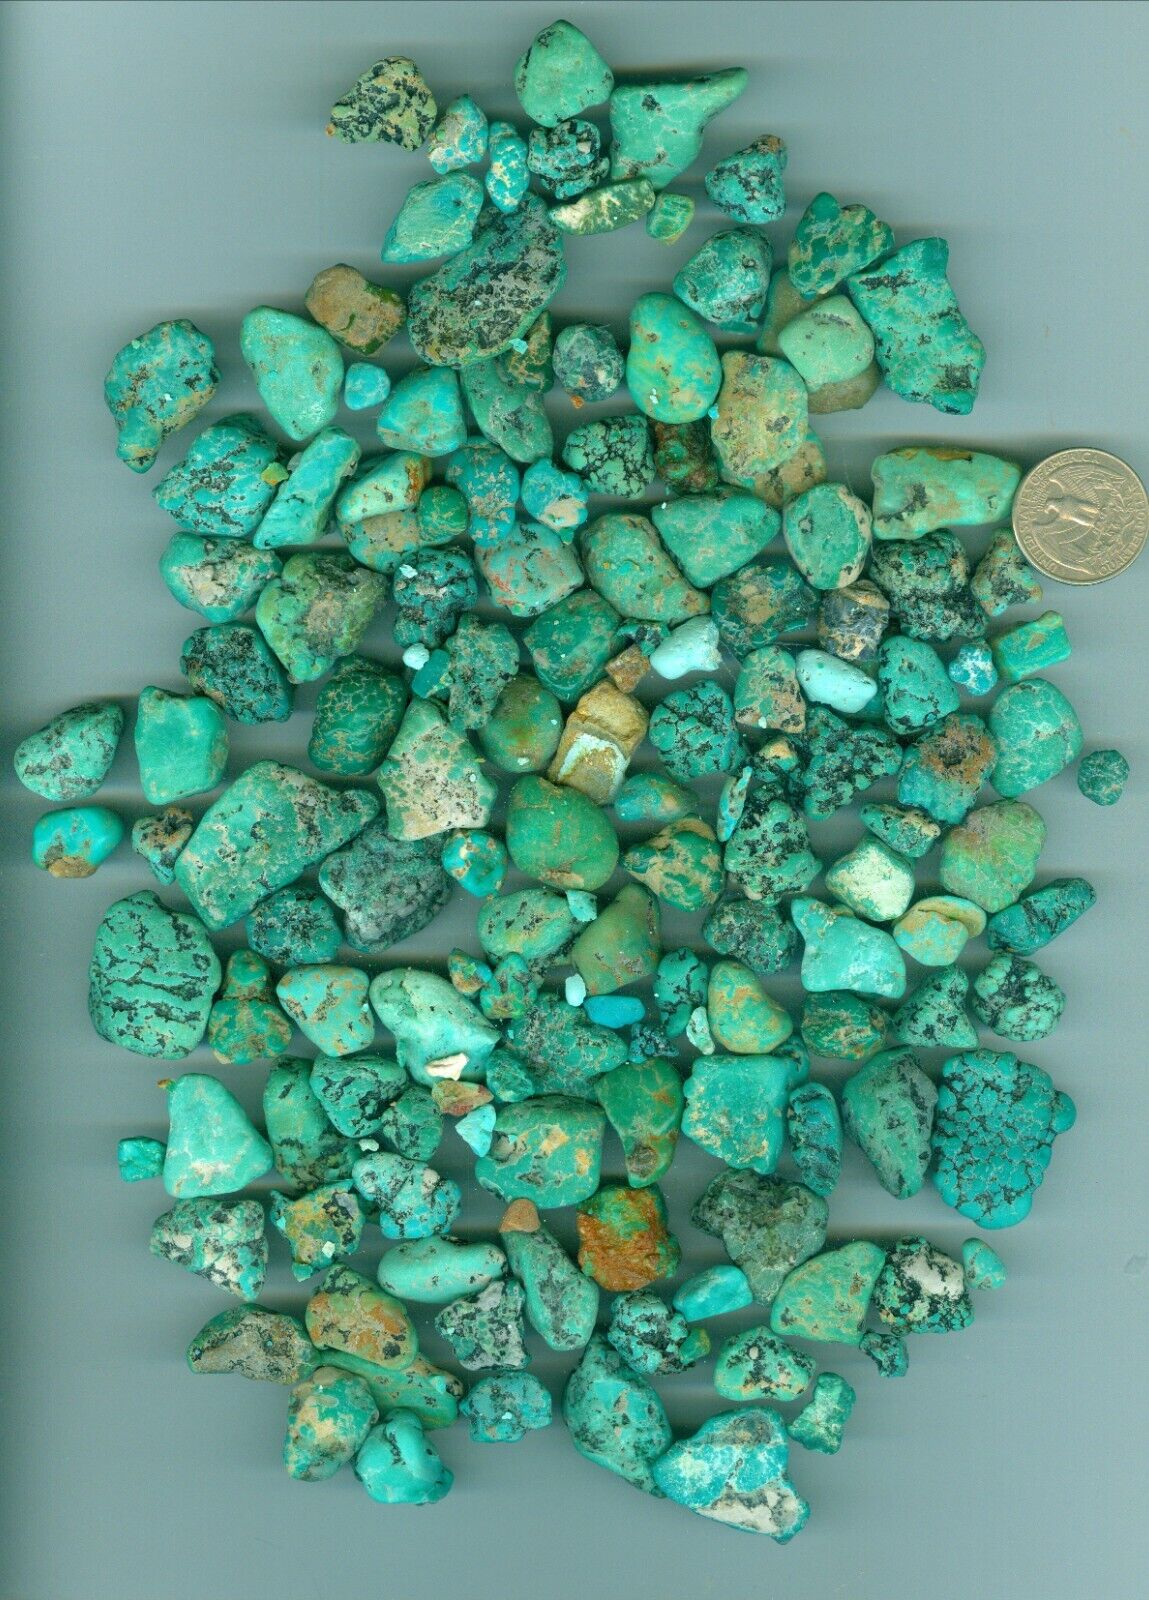 Stabilized Turquoise Rough 475 grams of American Fox Turquoise Cutting rough